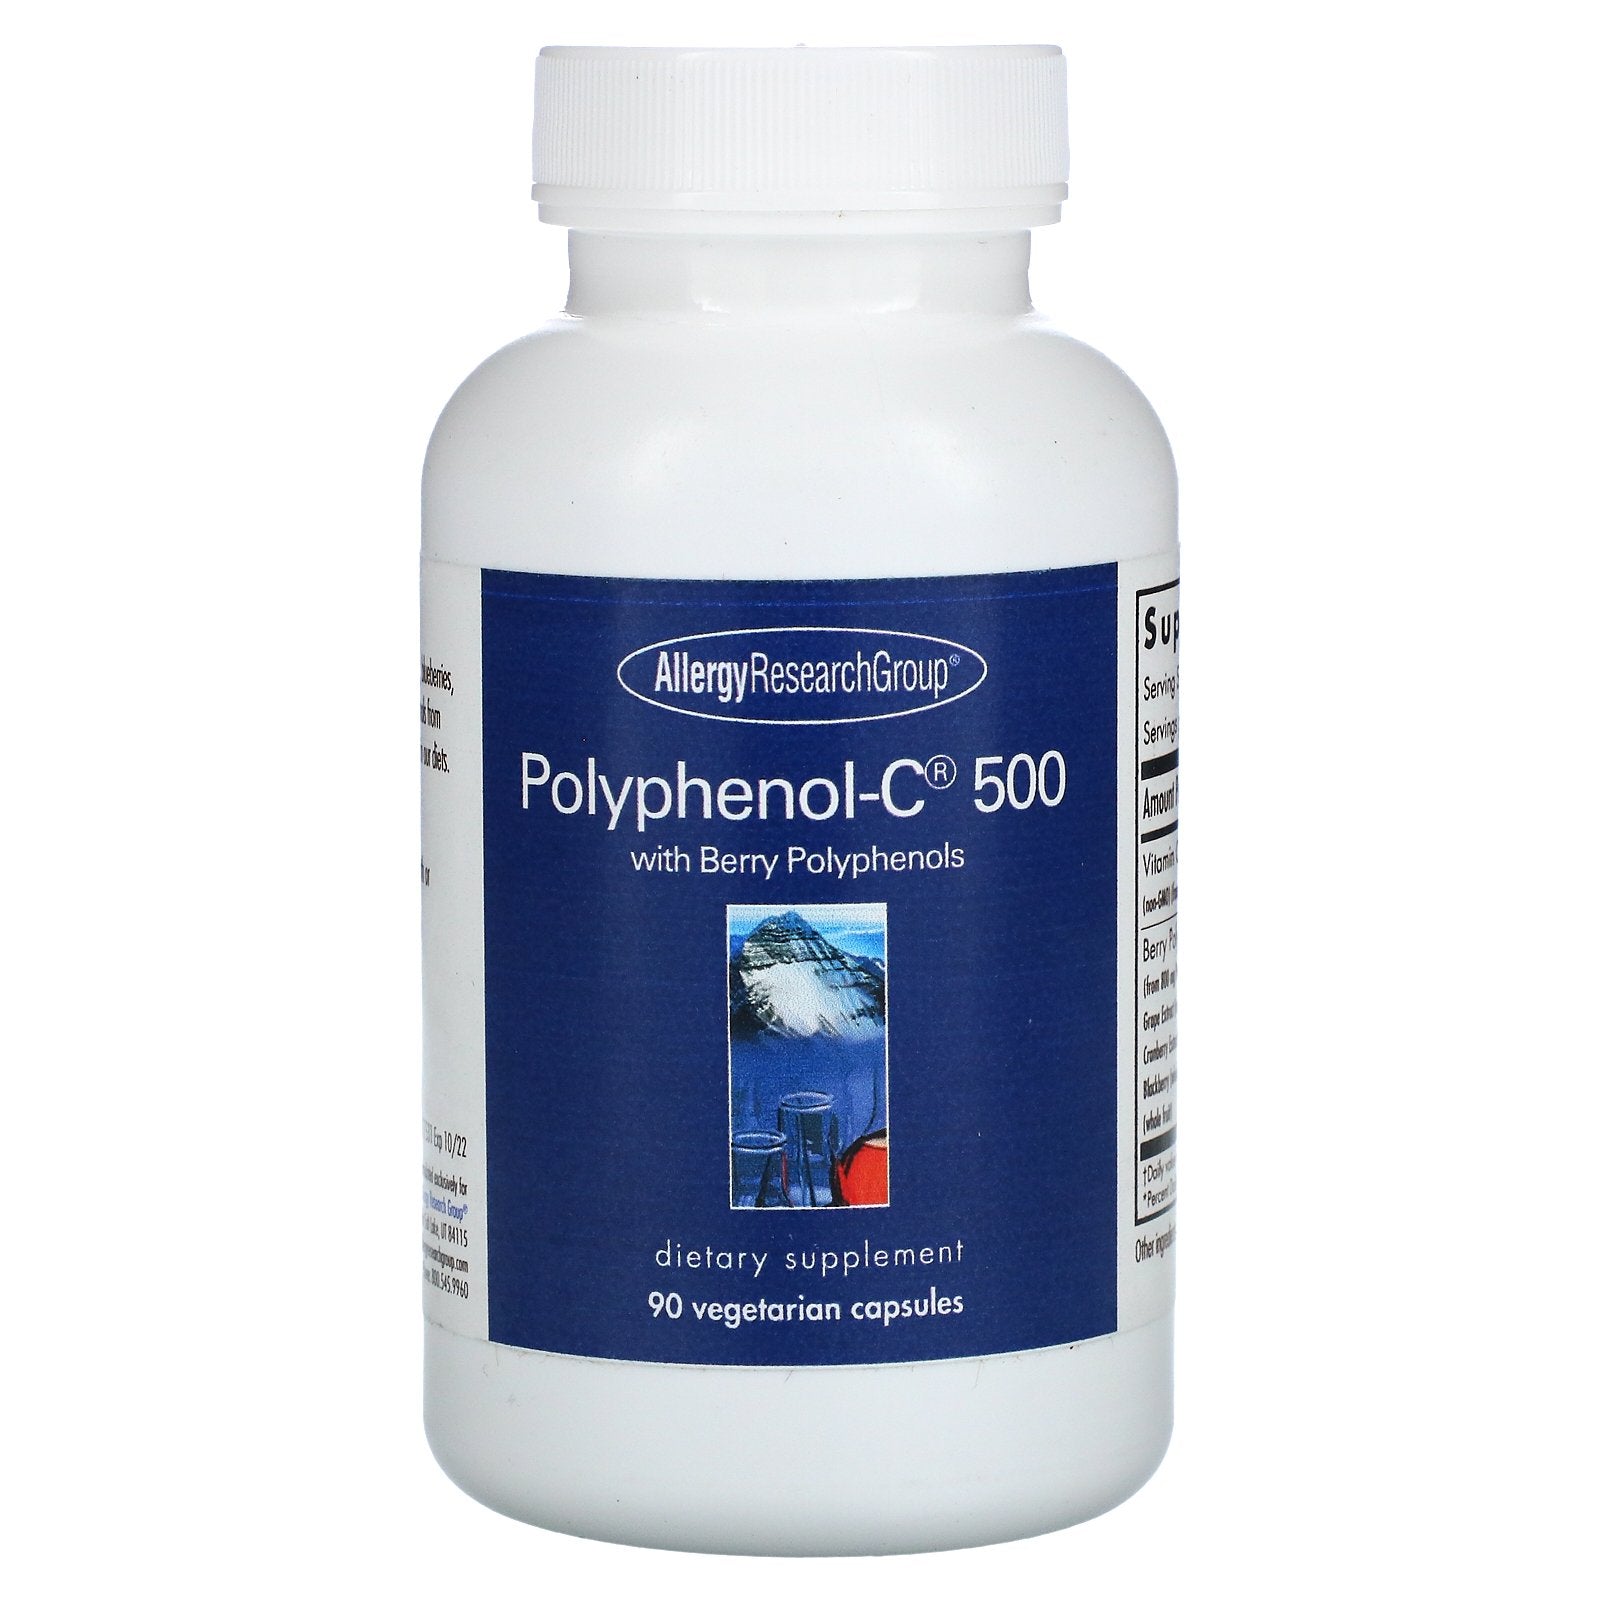 Allergy Research Group, Polyphenol-C 500 with Berry Polyphenols